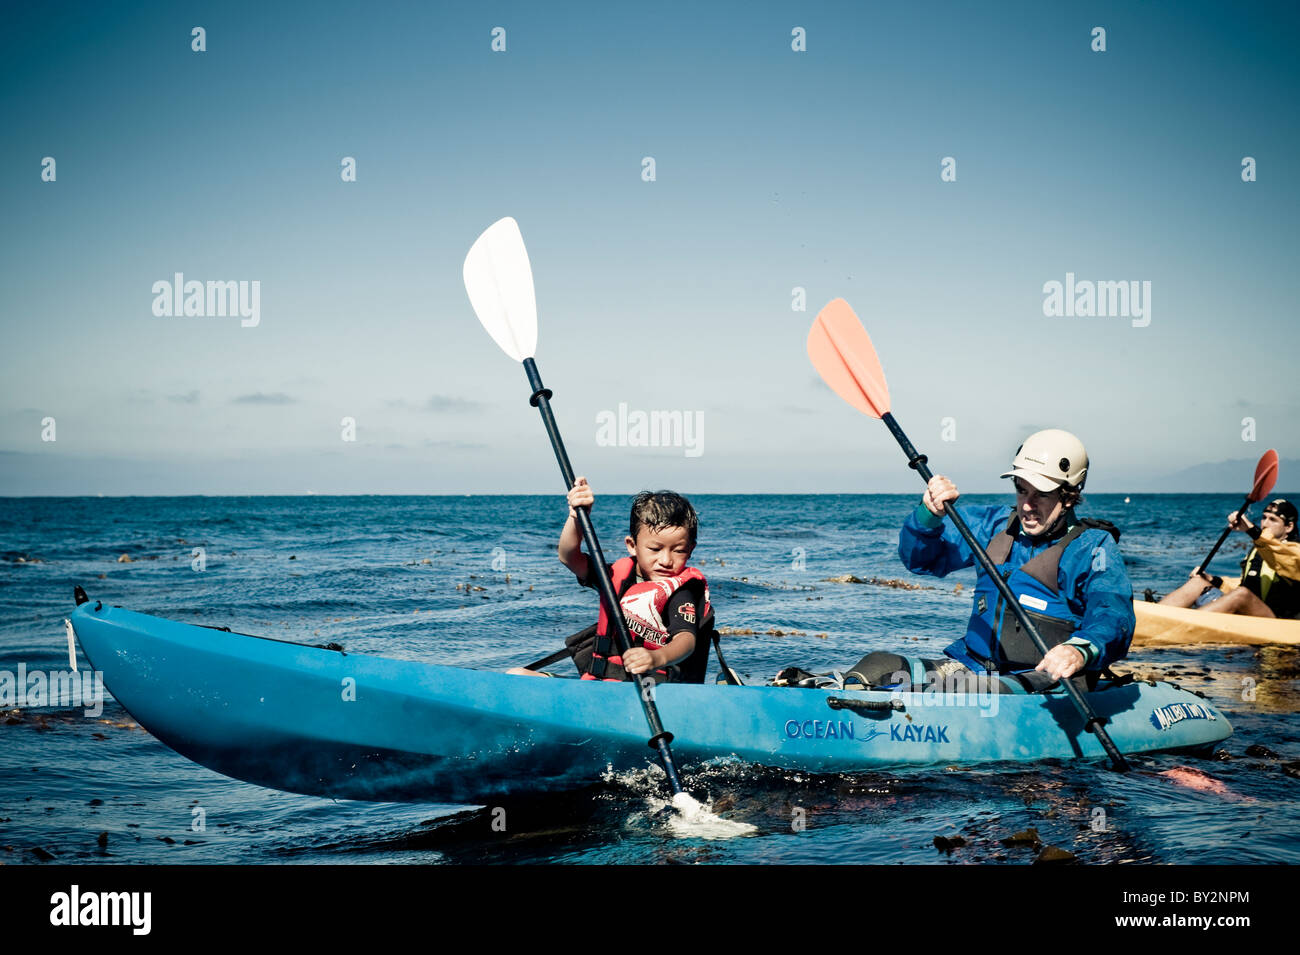 A young boy and friends paddle kayaks through kelp beds. Stock Photo